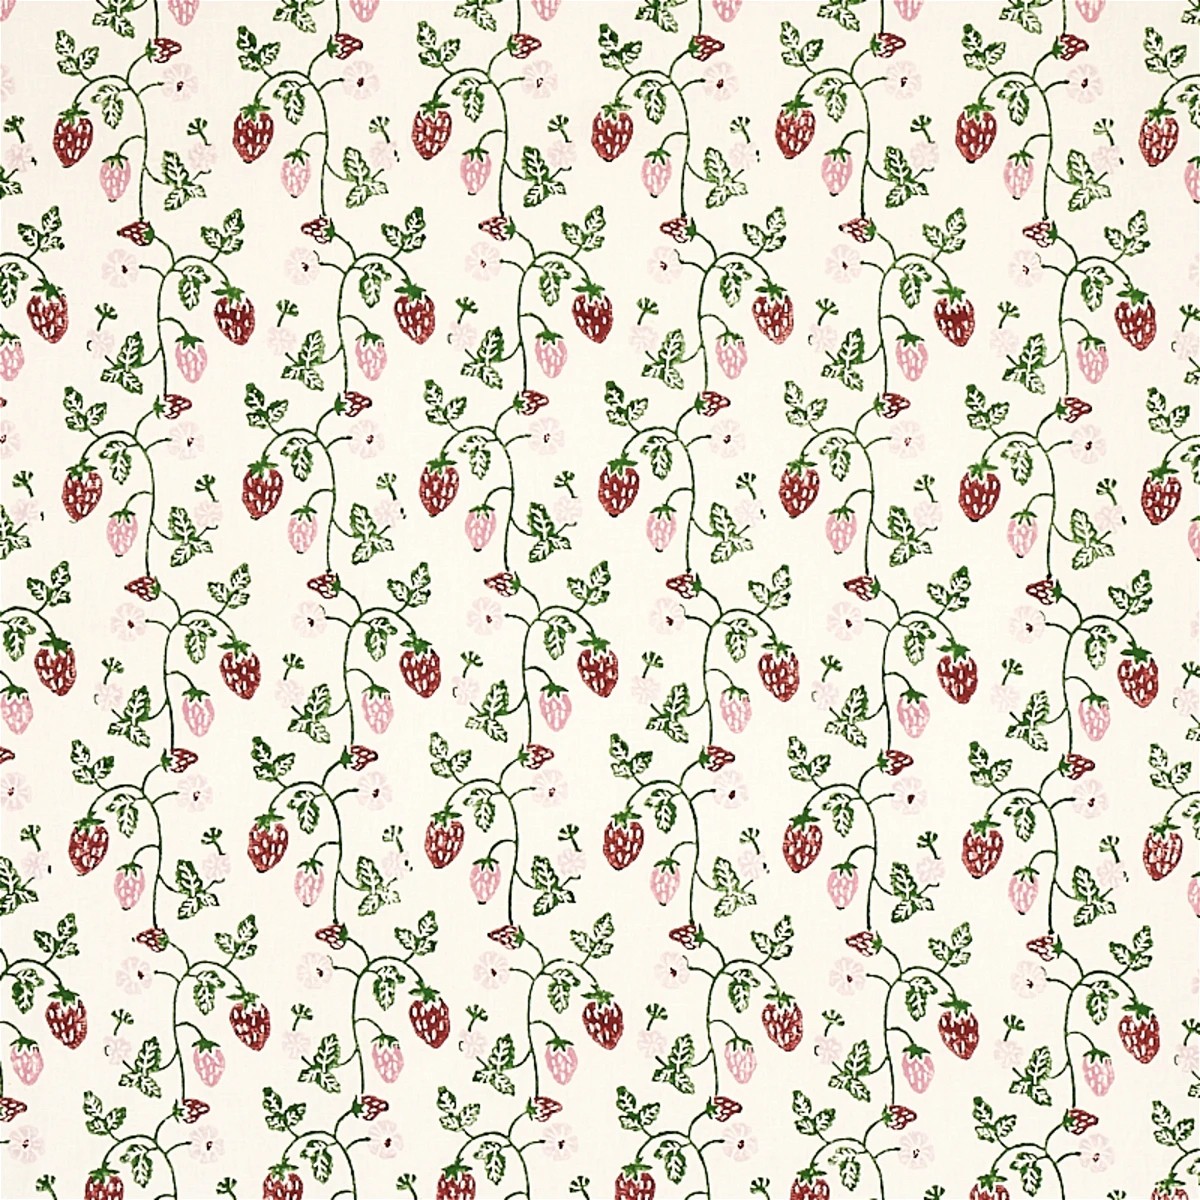 The image of an Strawberry Hand Block Print Fabric product